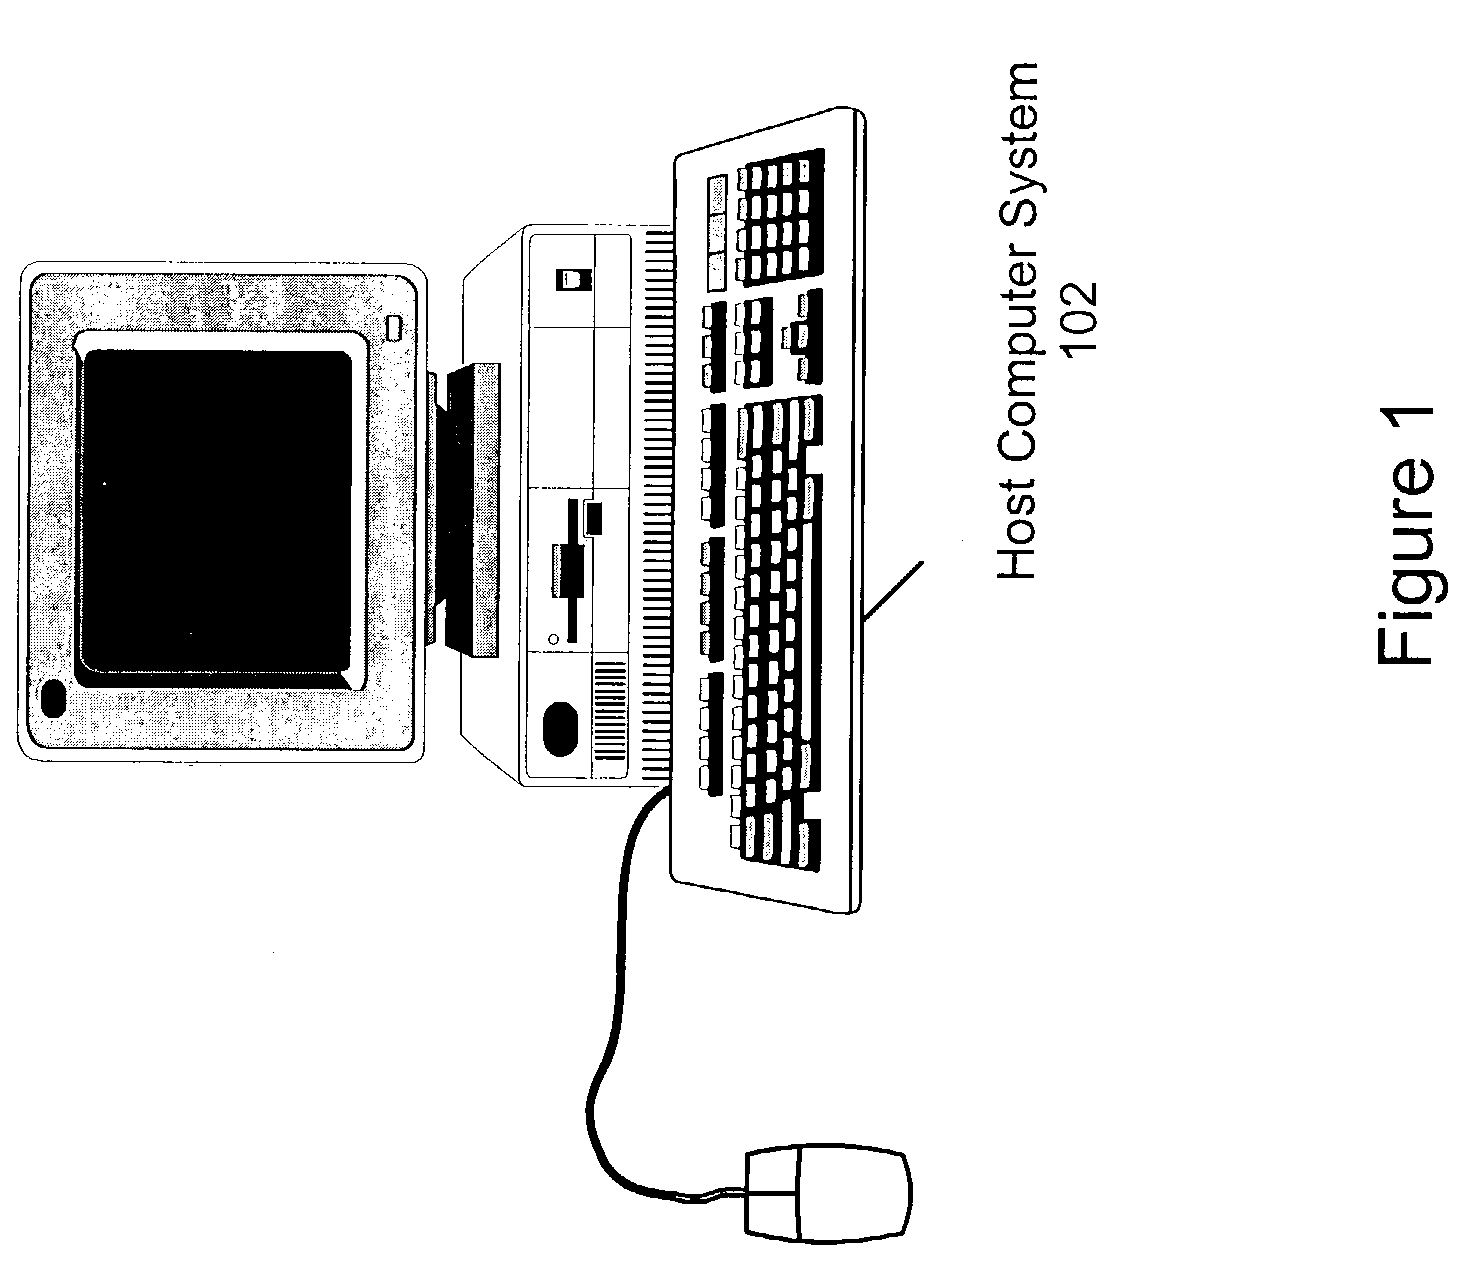 Automatically configuring a graphical user interface element to bind to a graphical program